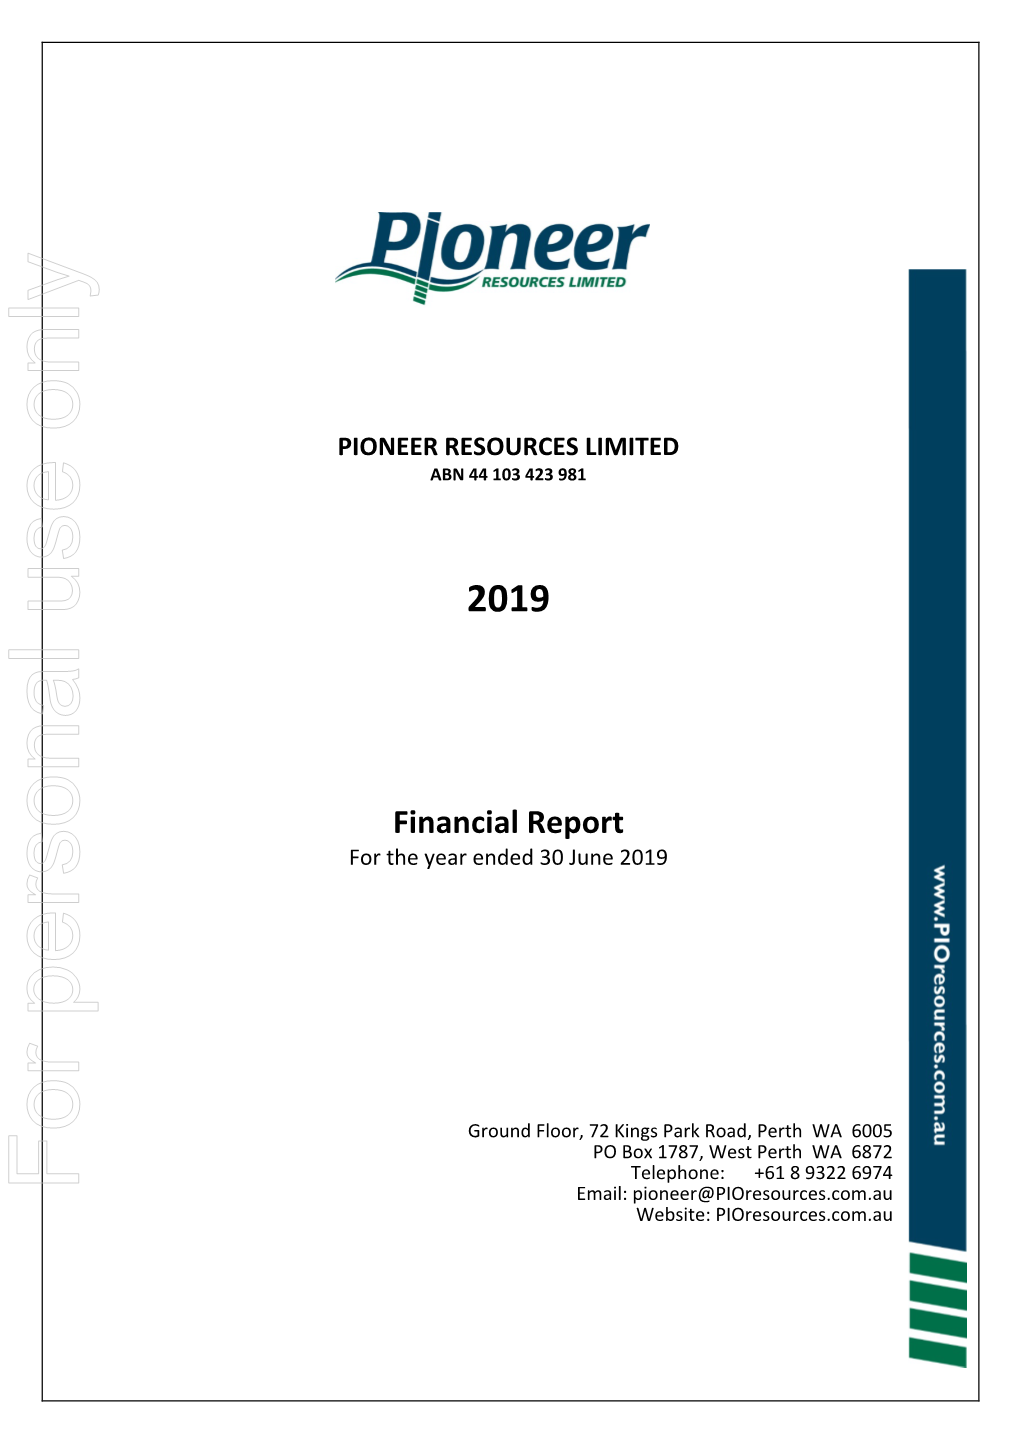 Pioneer Resources Limited Abn 44 103 423 981